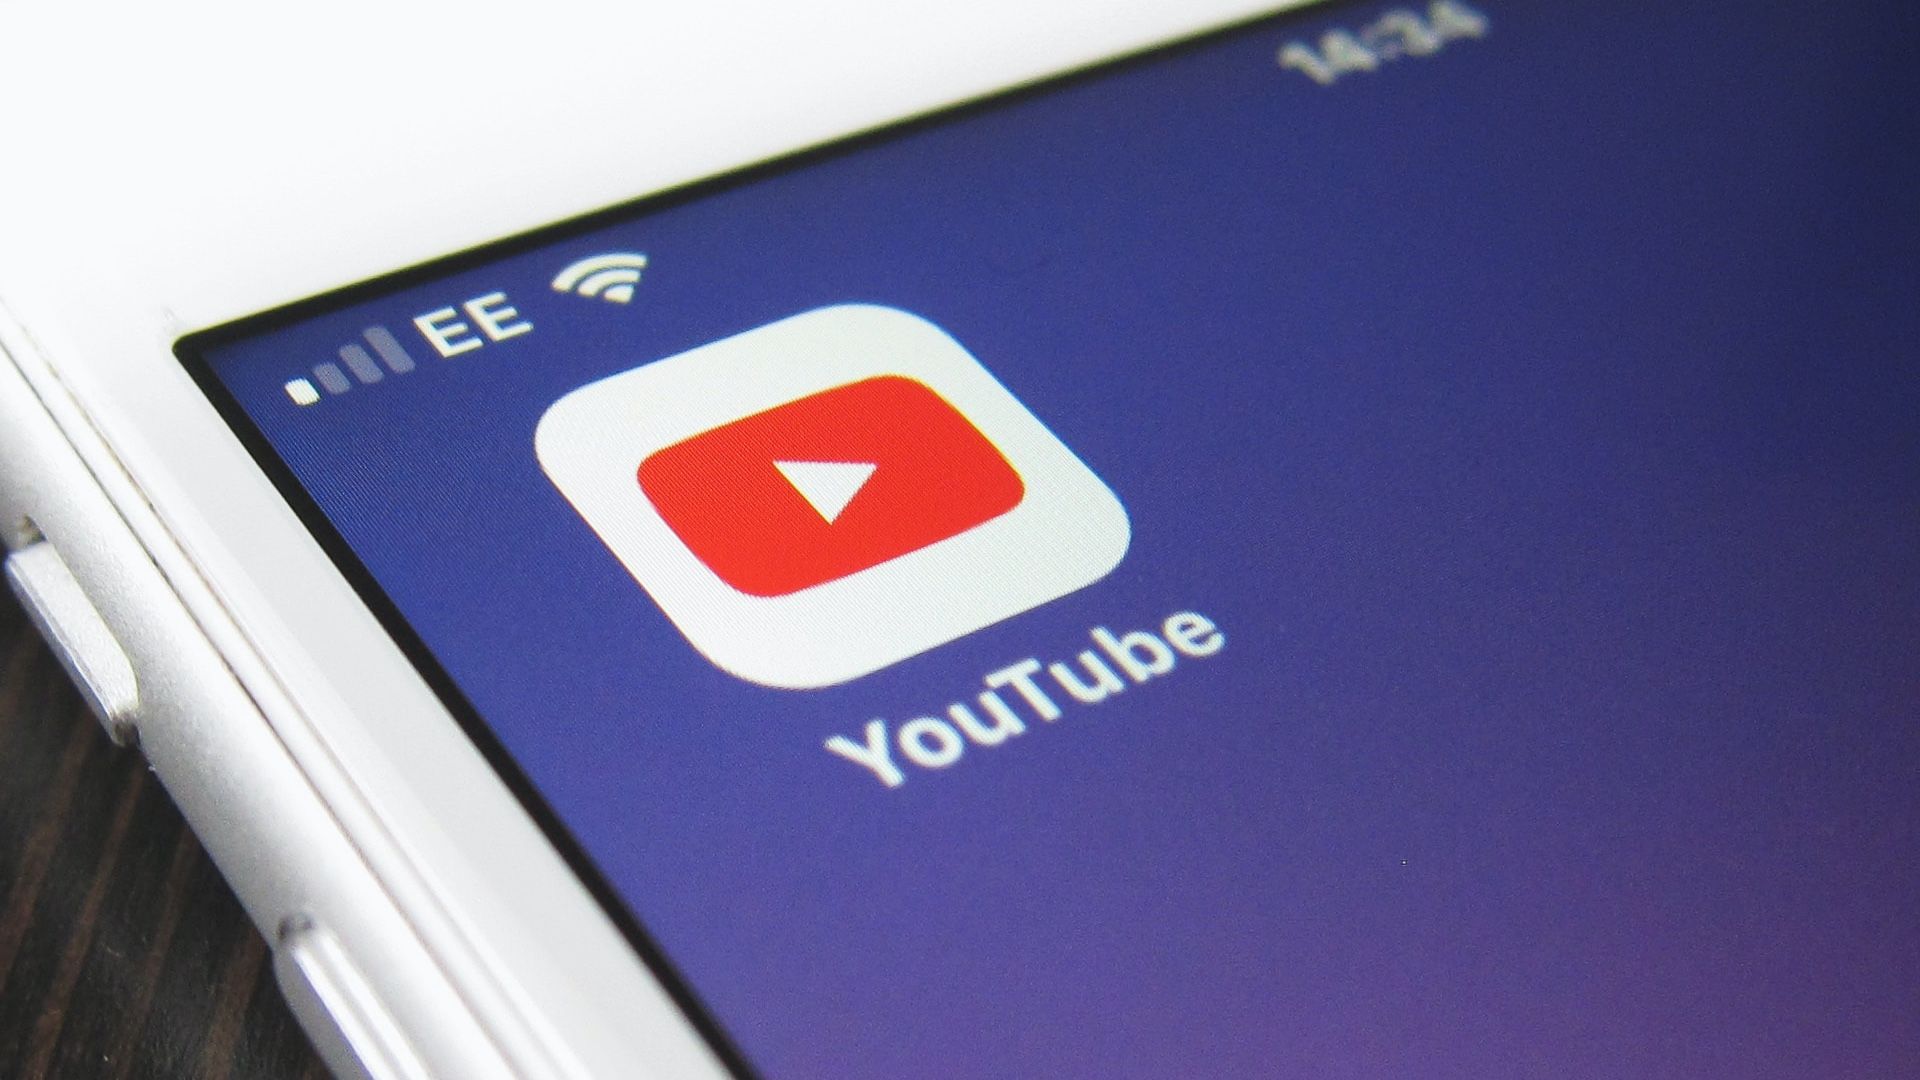 Google adds YouTube Engagements in the attribution reports